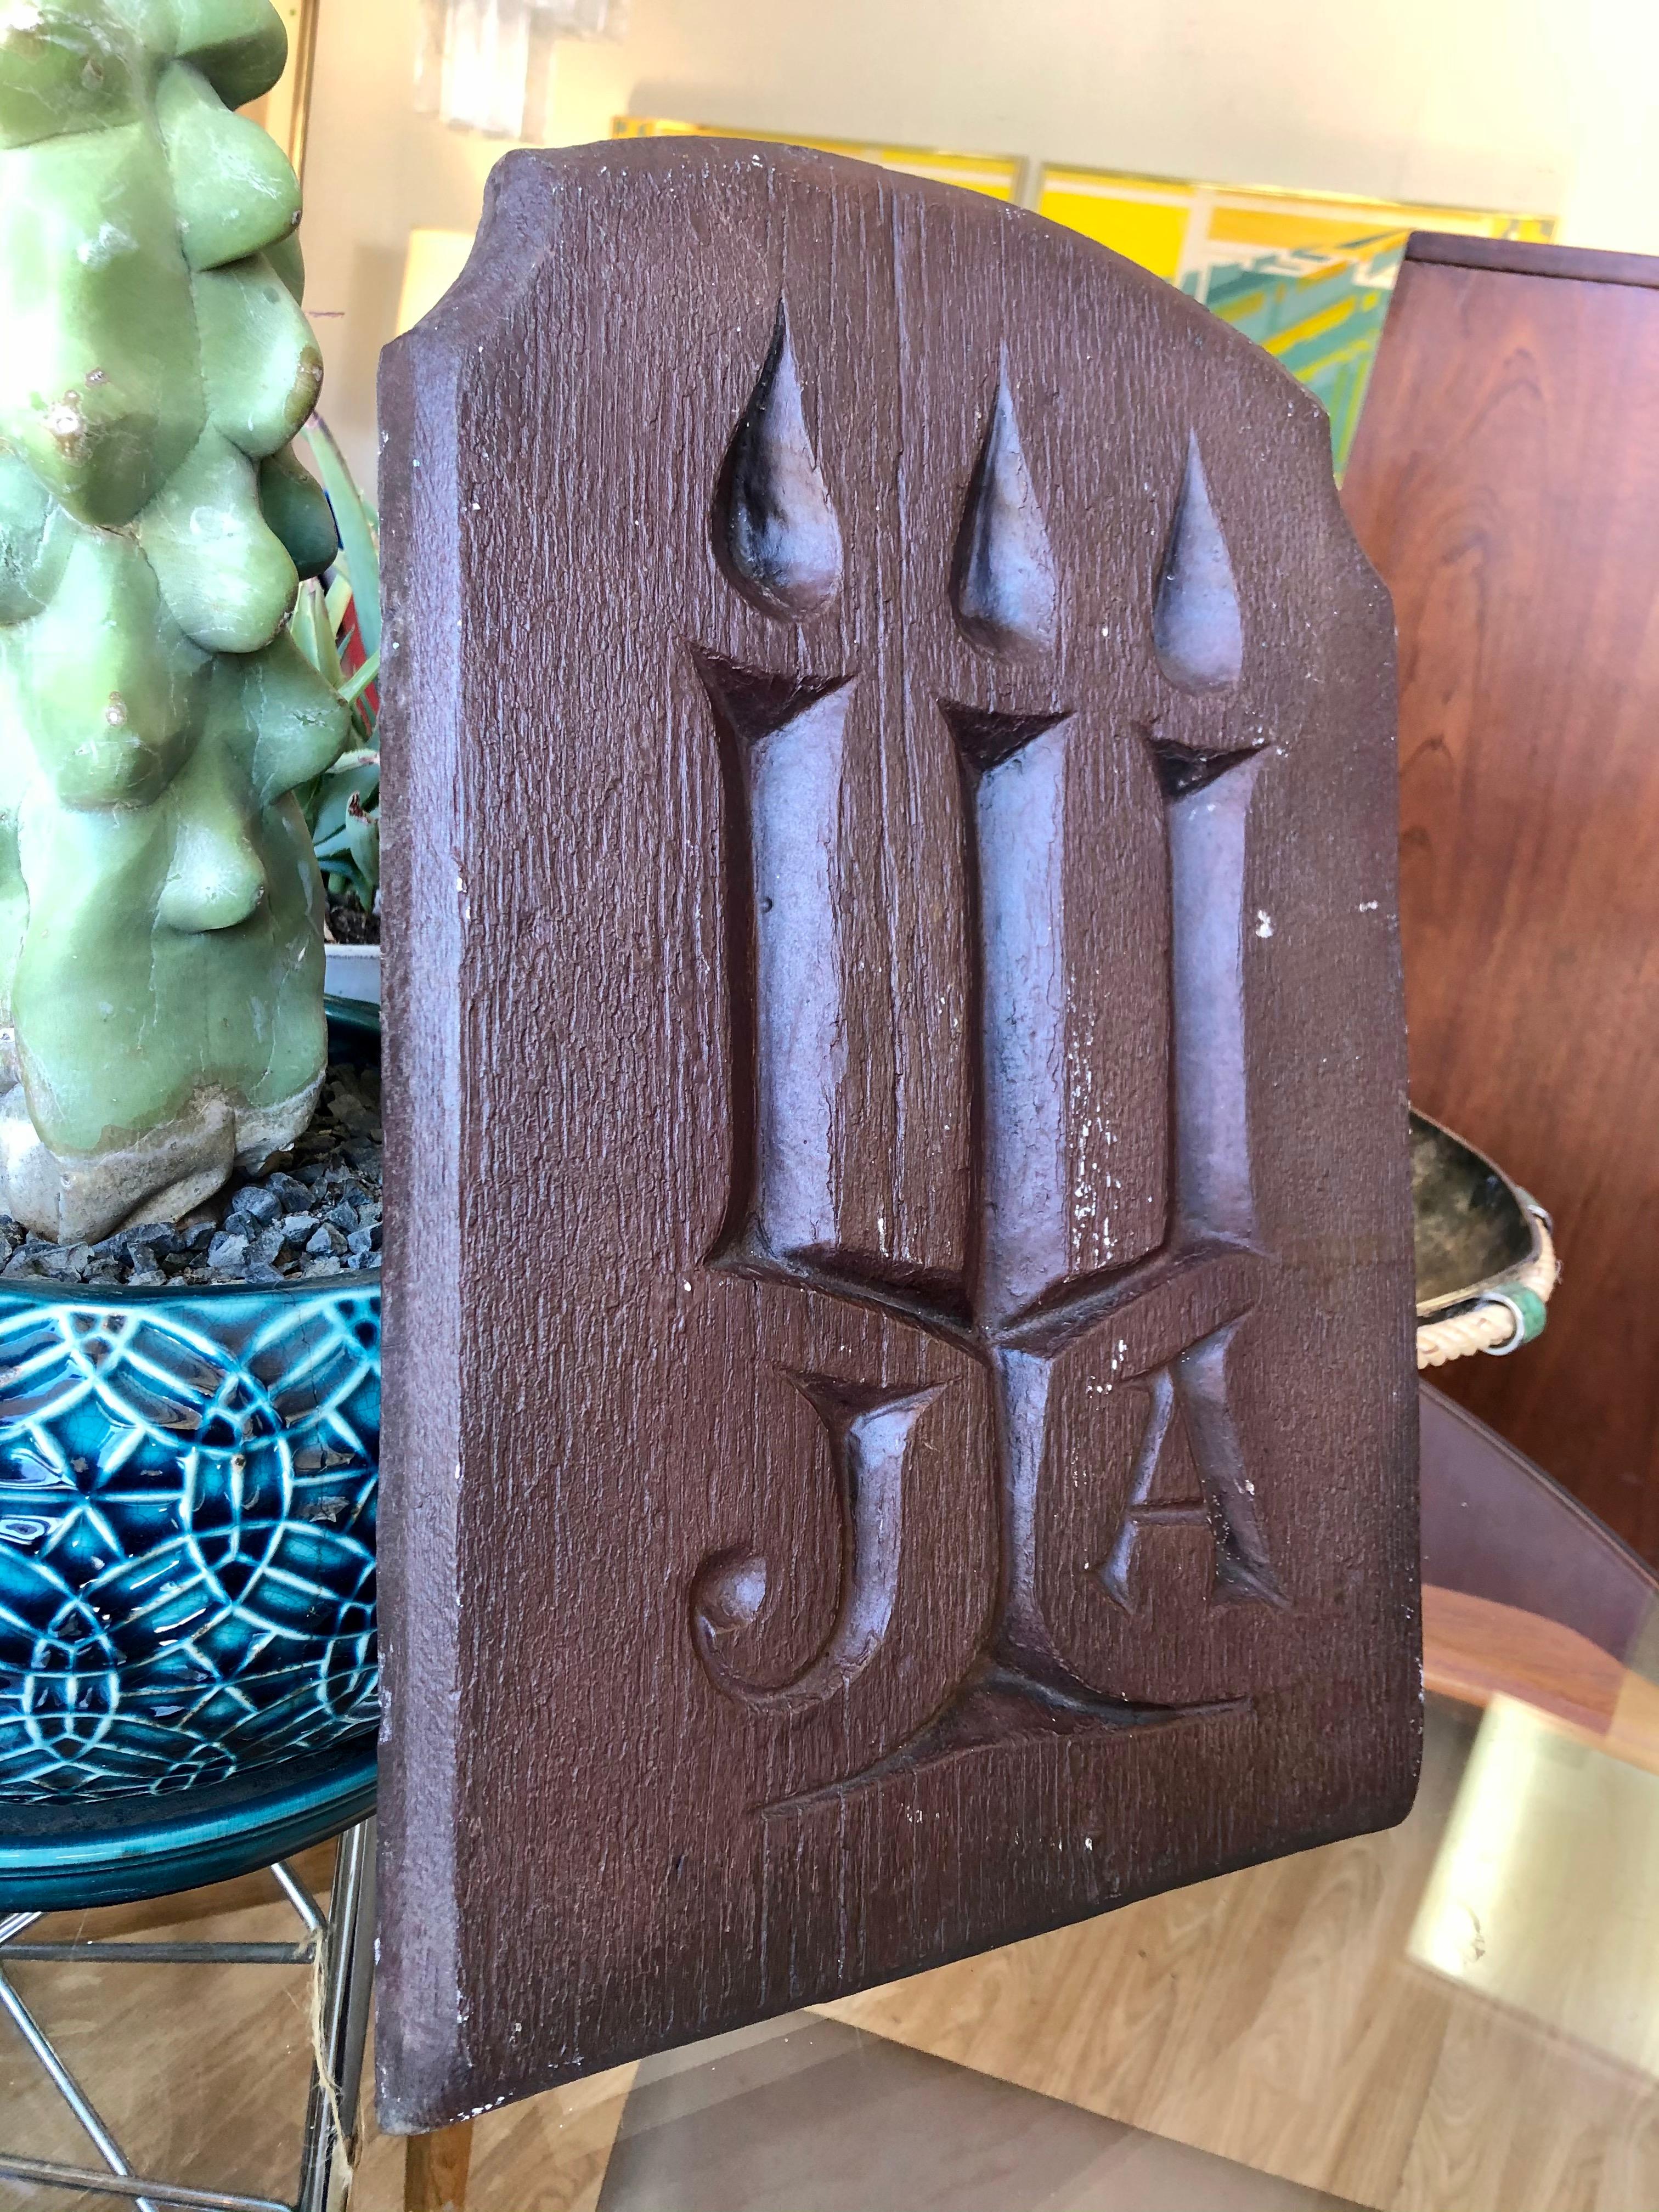 This vintage James Avery plaque is in overall good condition. Bronze patinated and incised to look like wood. It's a store sign/plaque,
circa 1970s, USA.
Dimensions:
16.5